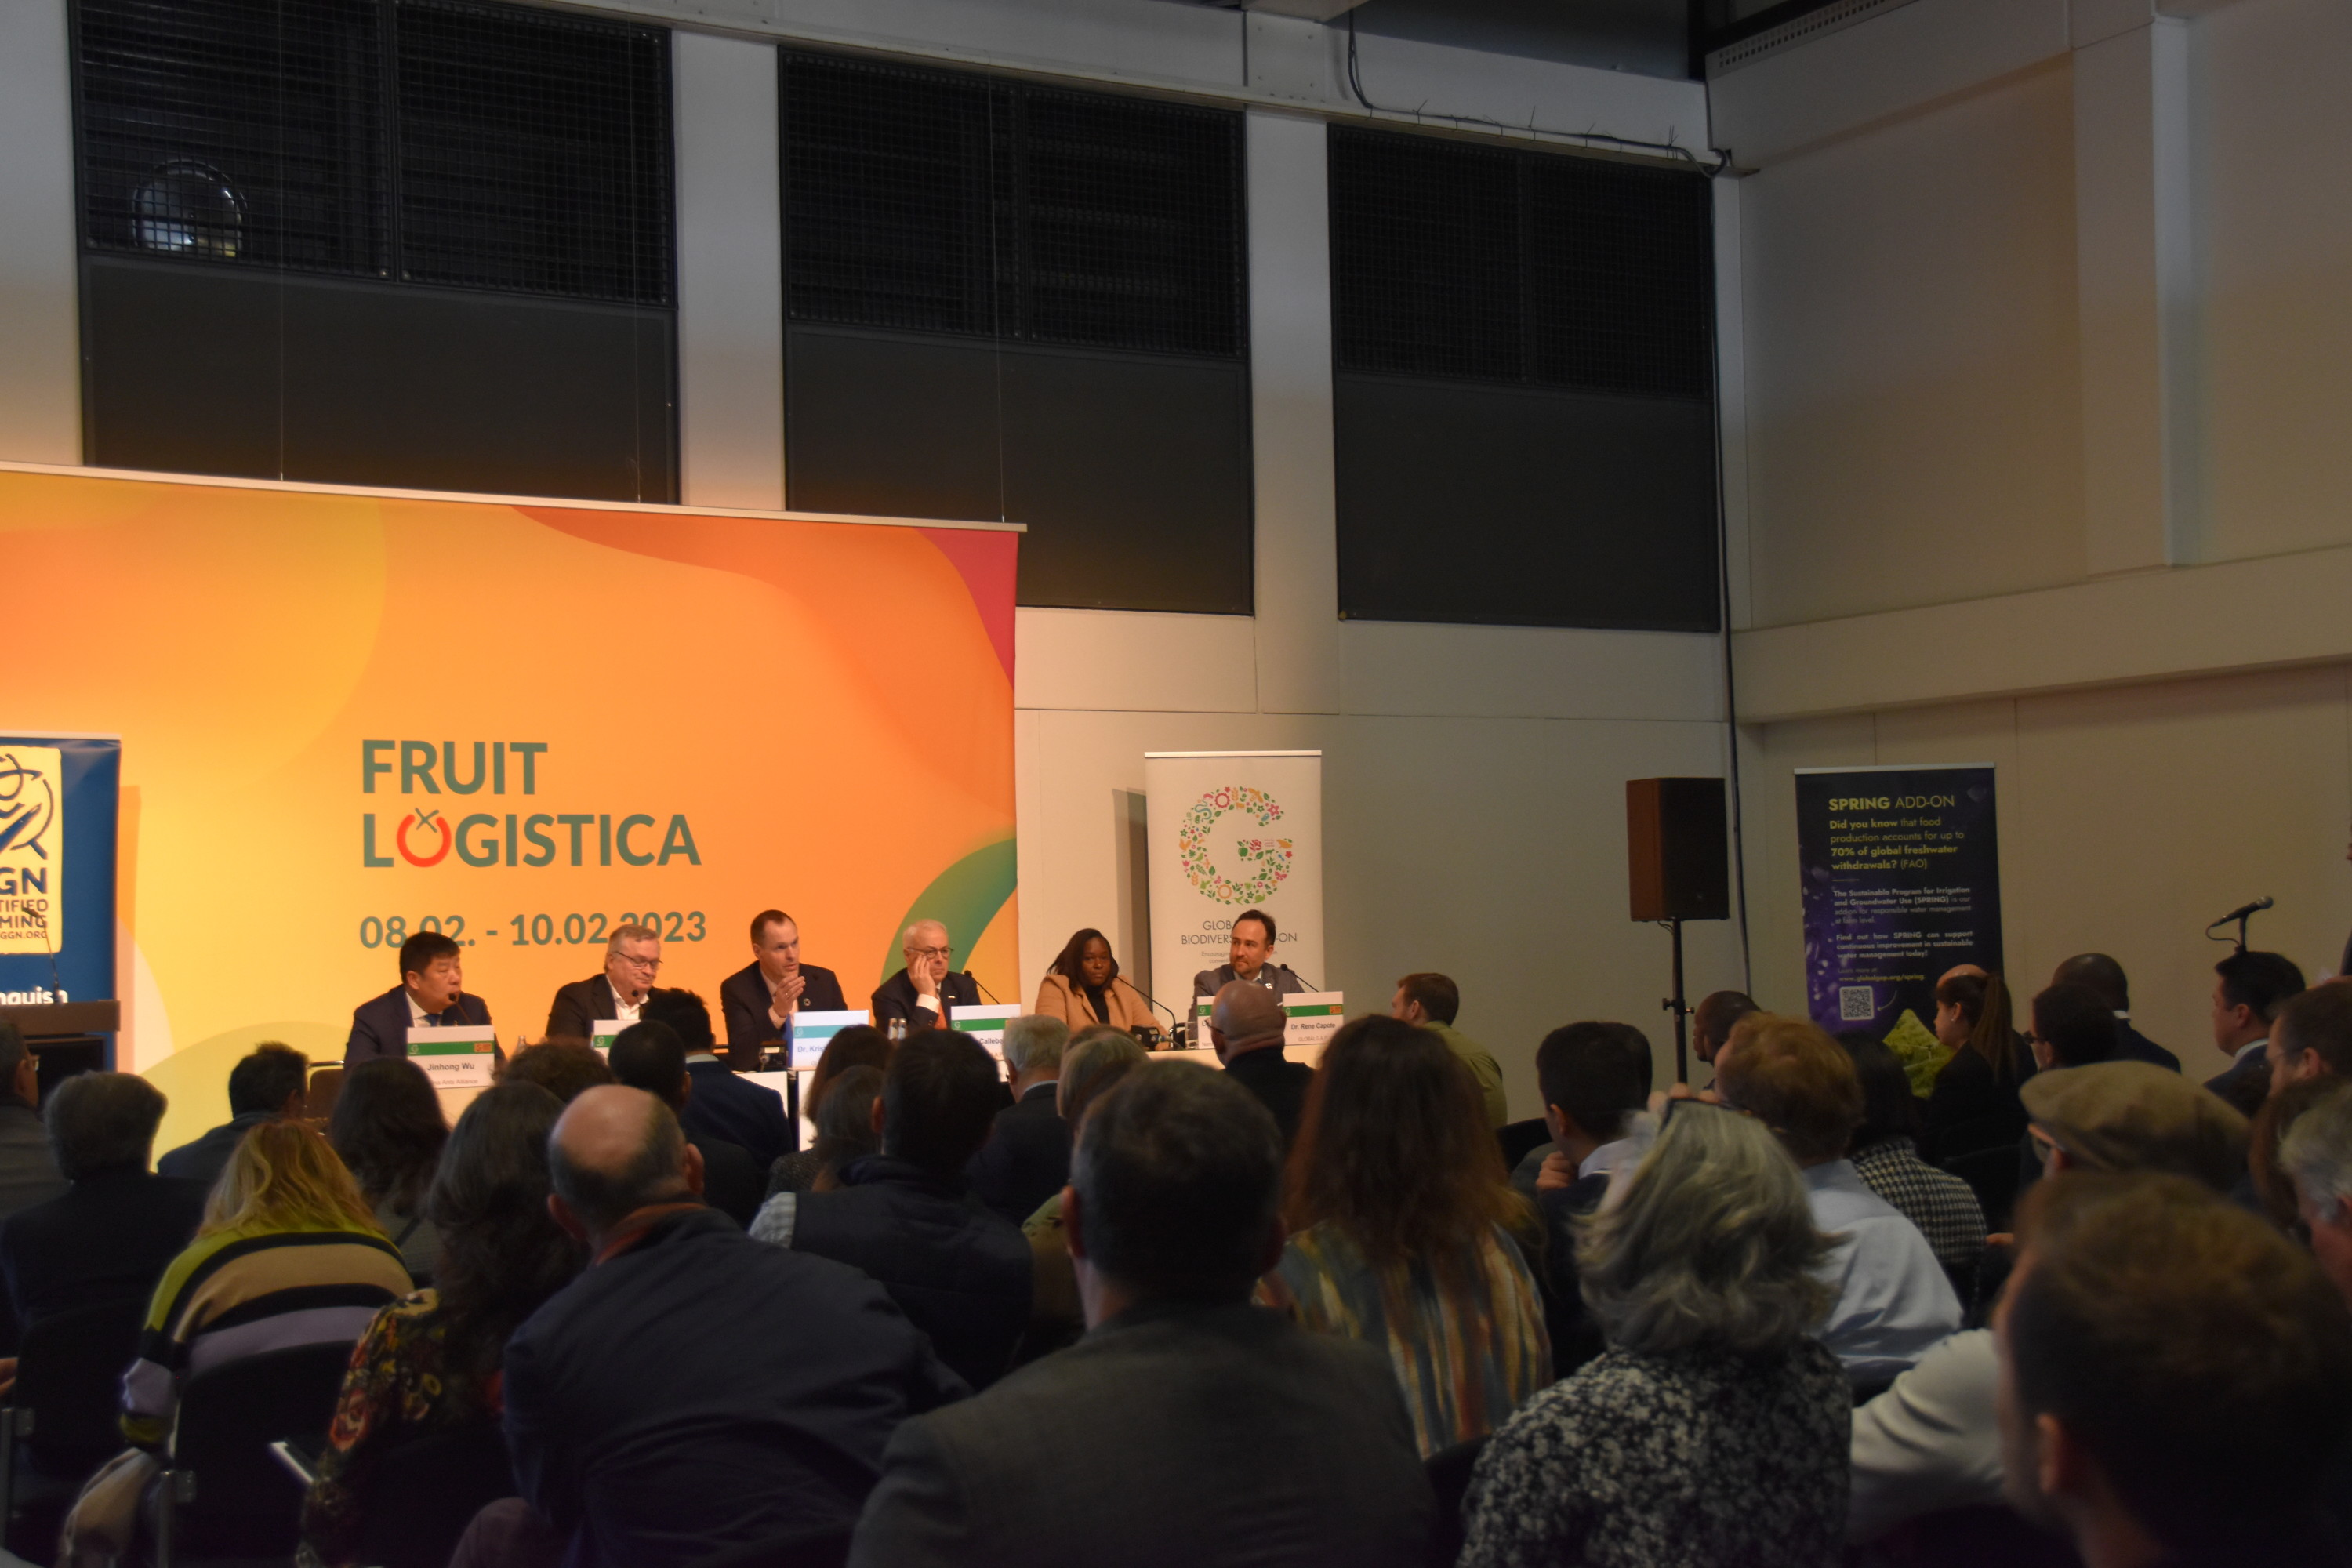 Image of the GLOBALG.A.P. press conference at Fruit Logistica 2023